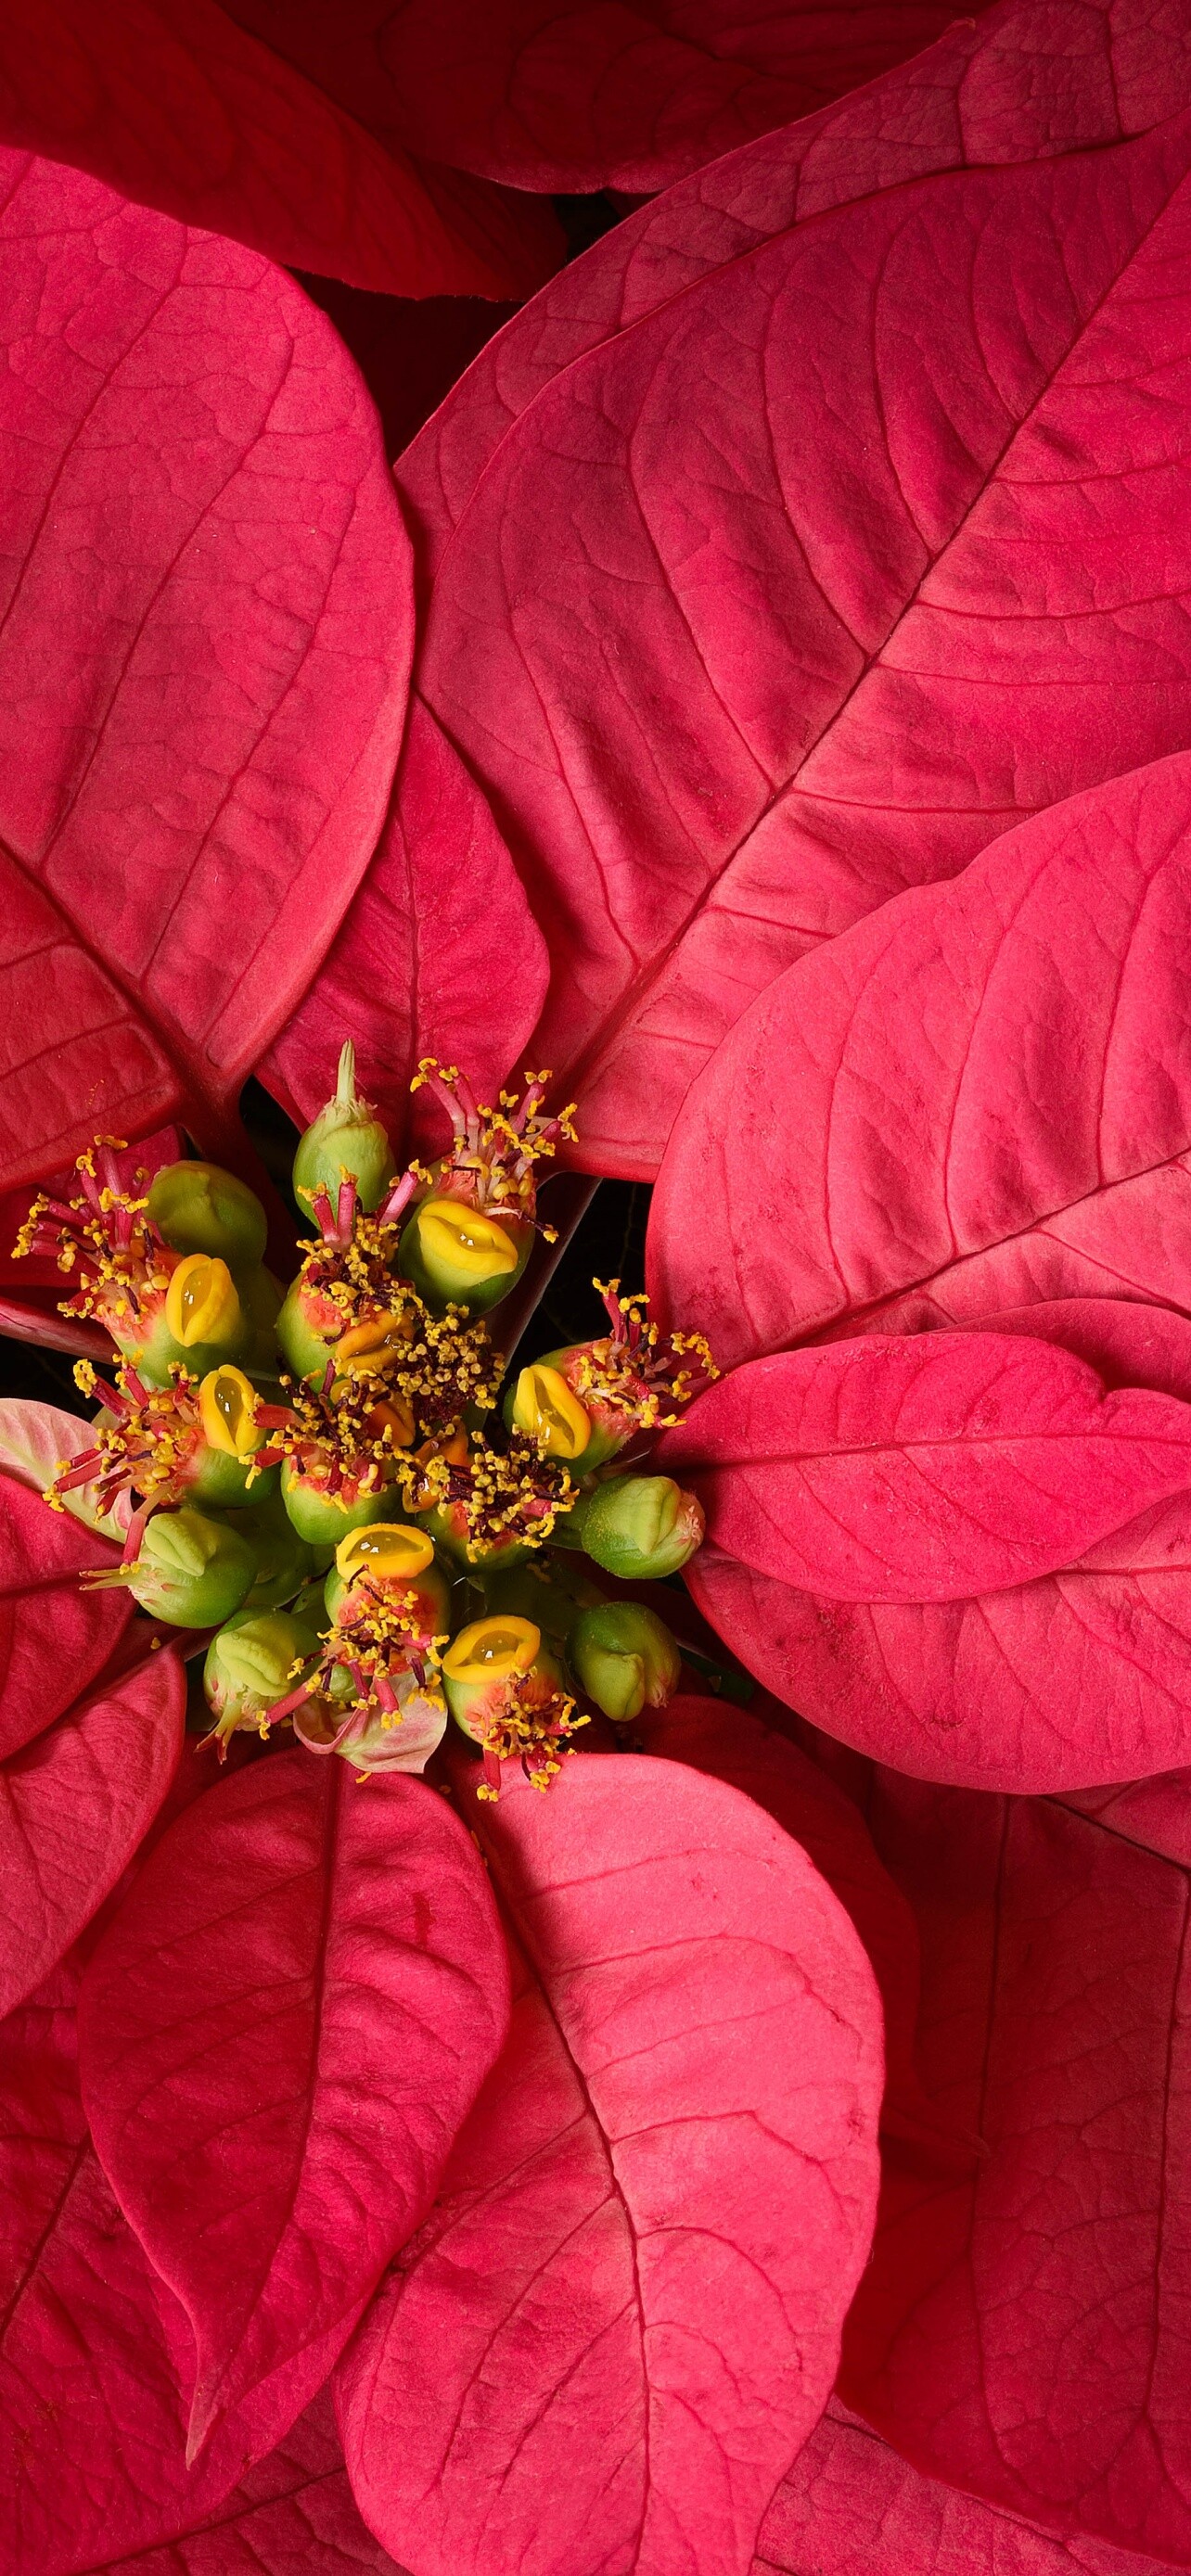 Poinsettia: The star-shaped leaf pattern is said to symbolize the Star of Bethlehem, and the red color represents the blood sacrifice of Jesus's crucifixion. 1290x2780 HD Wallpaper.